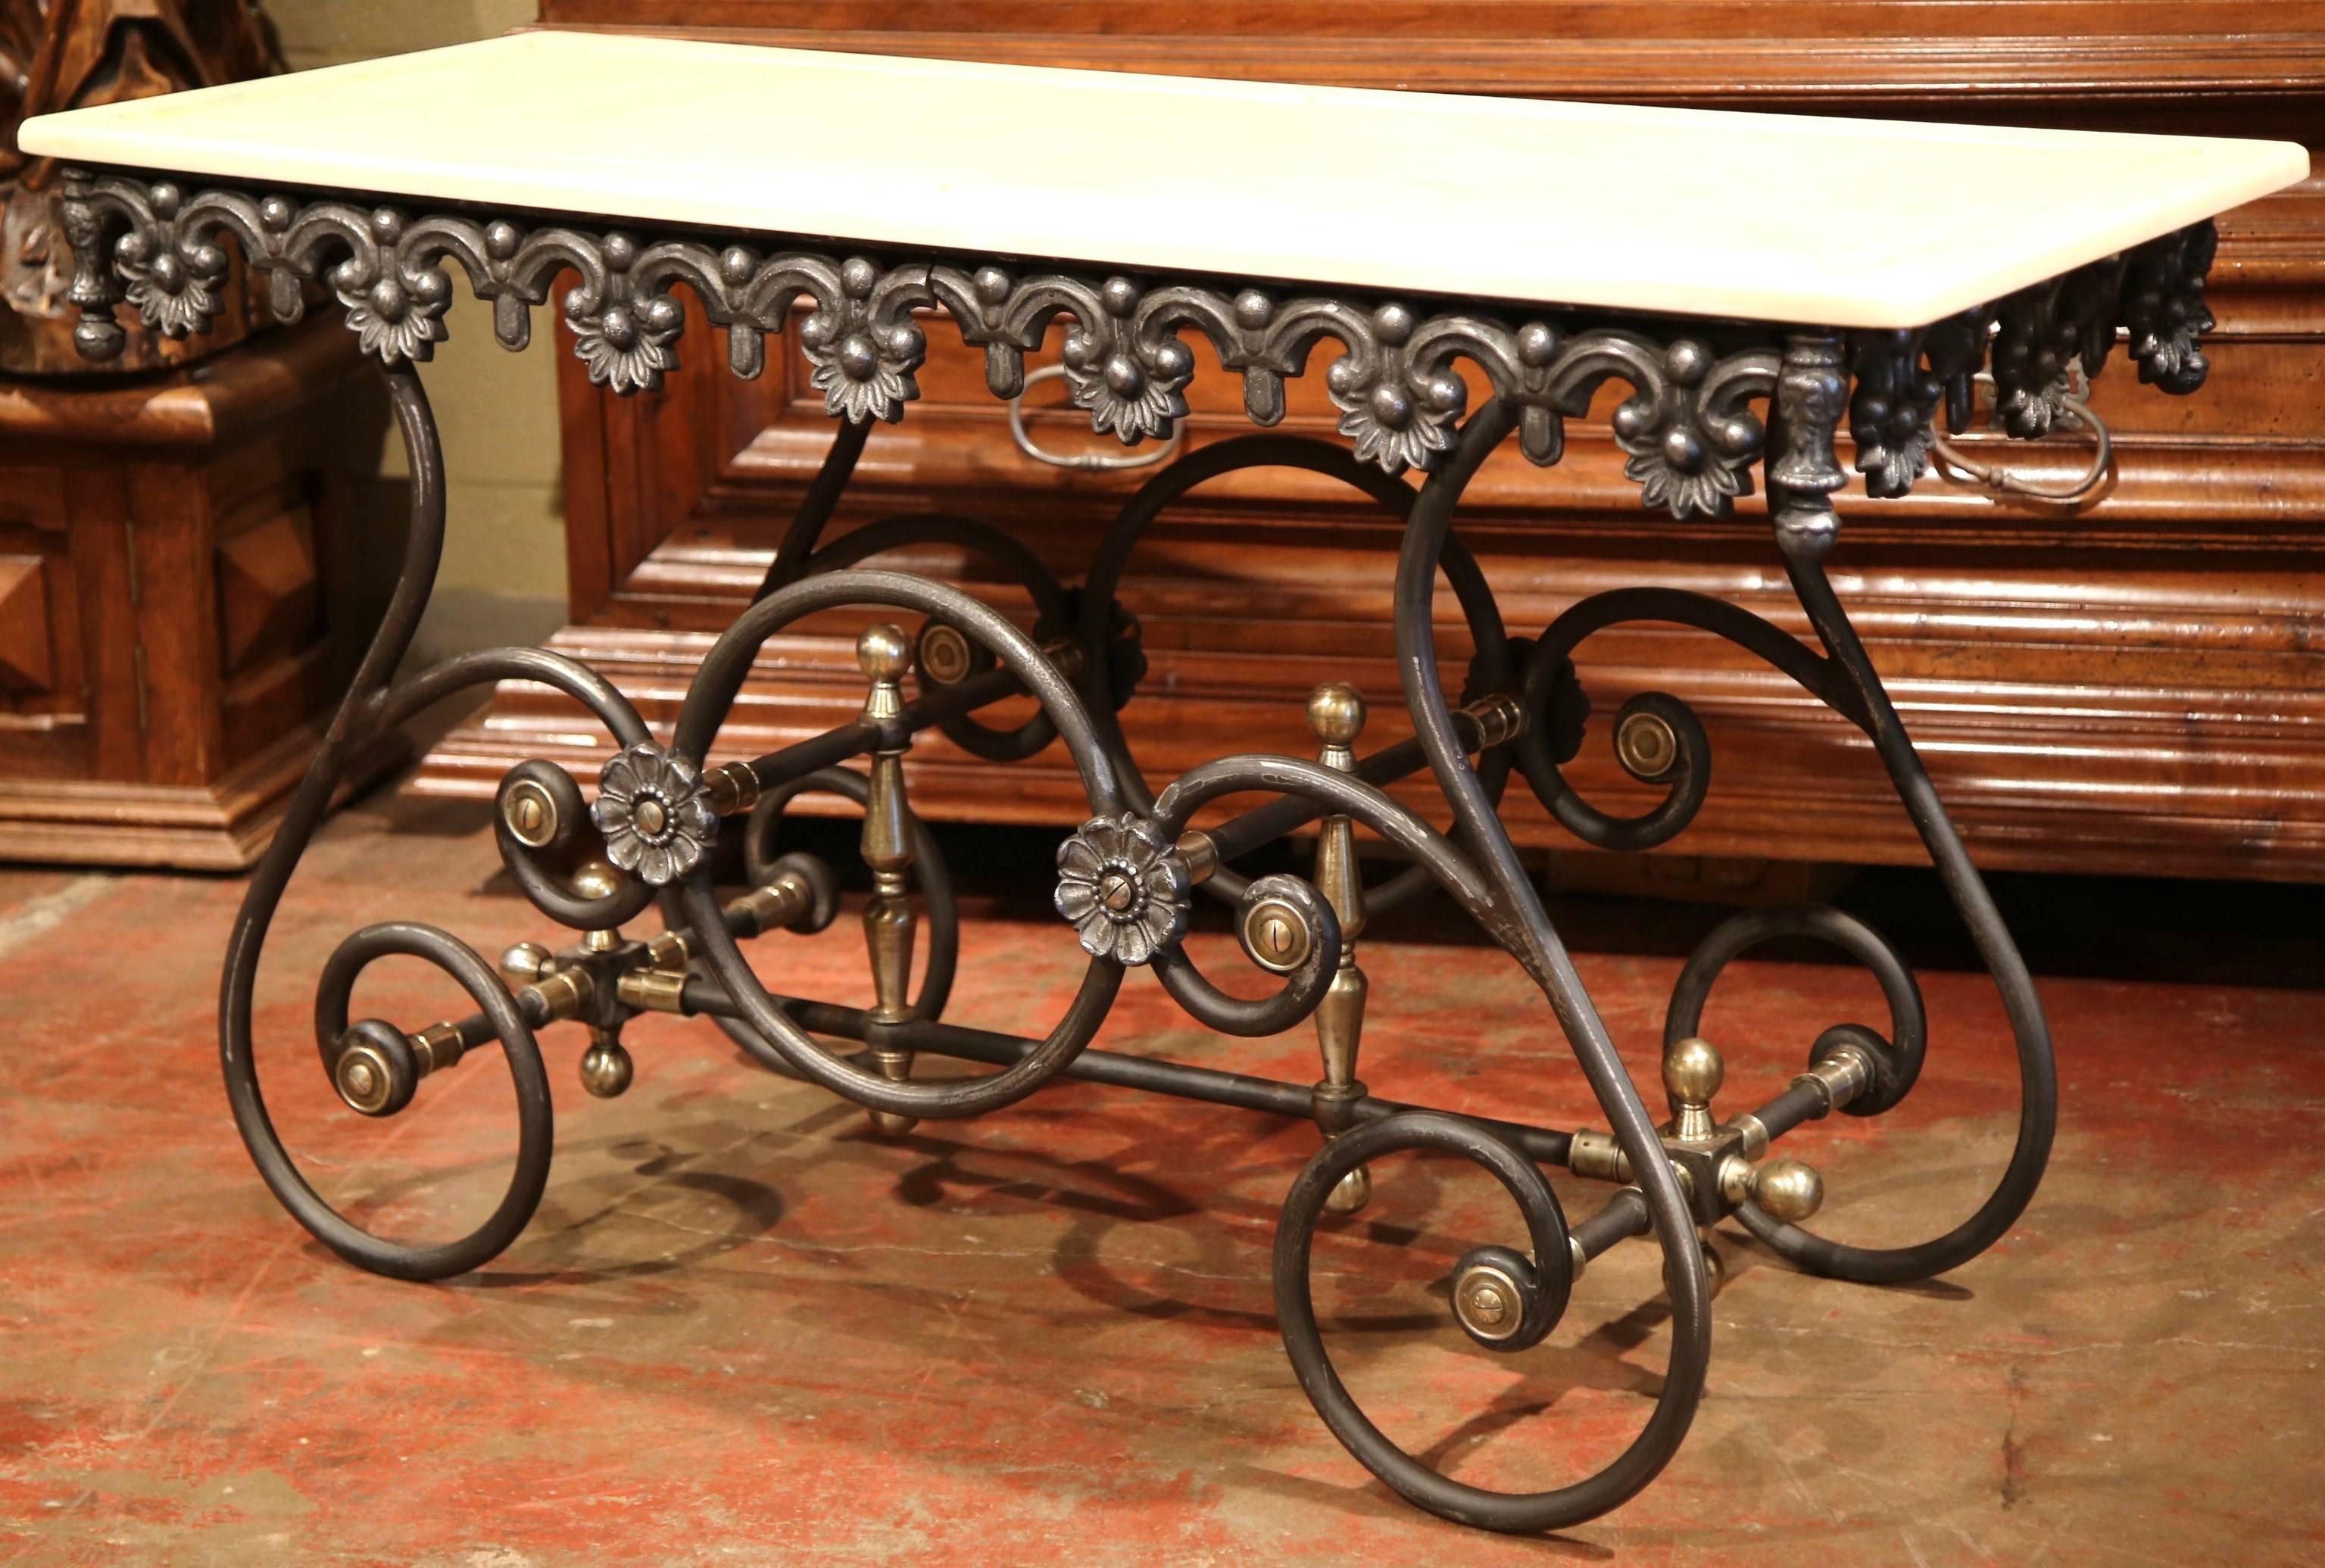 This long, narrow French butcher table (or pastry table) would add the ideal amount of surface space to any kitchen. This table has a polished iron finish and features a scalloped apron with intricate metal work and beautiful scrolled legs with